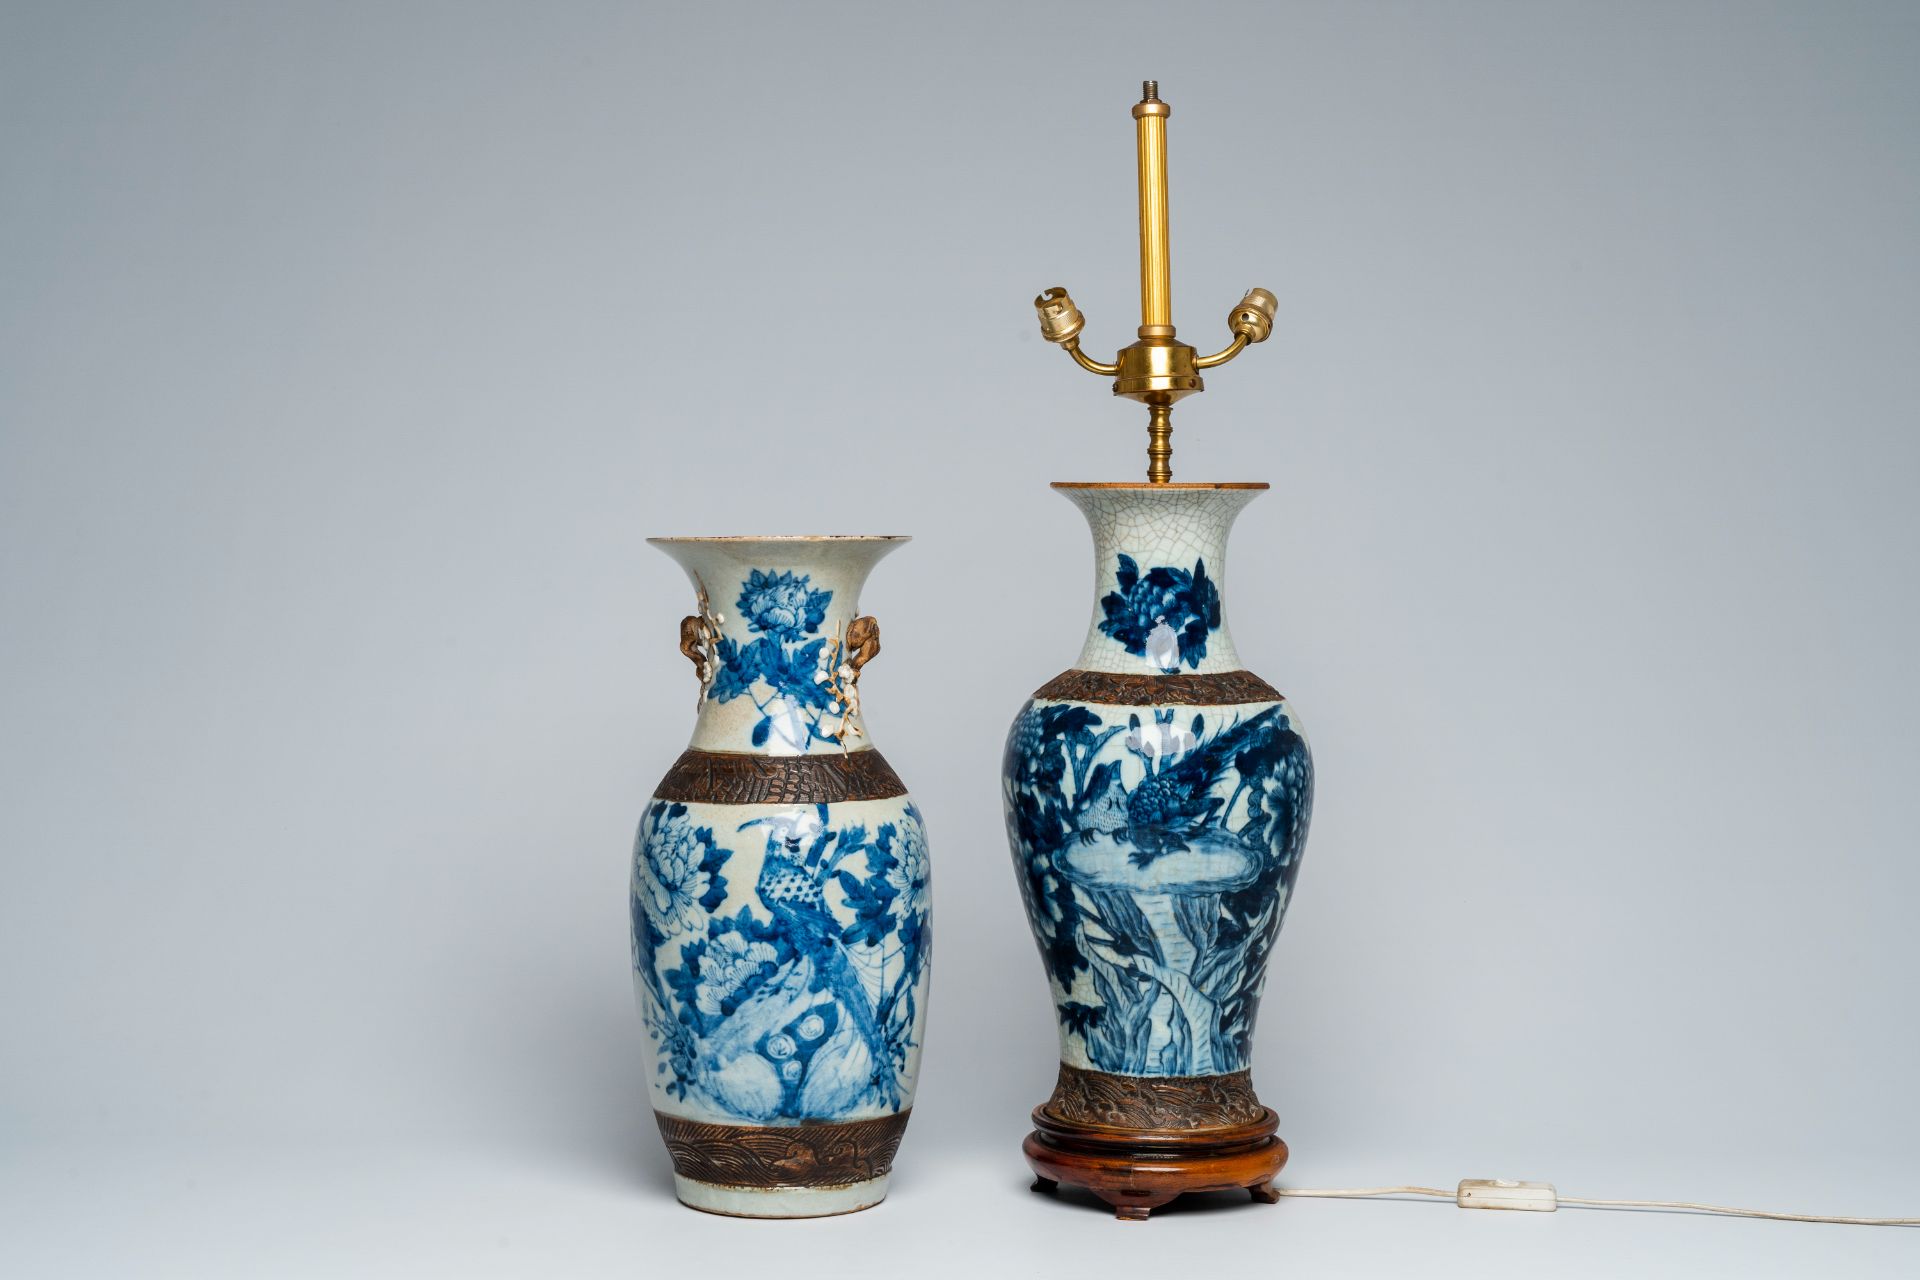 Two Chinese Nanking crackle glazed blue and white vases with birds among blossoming branches, one of